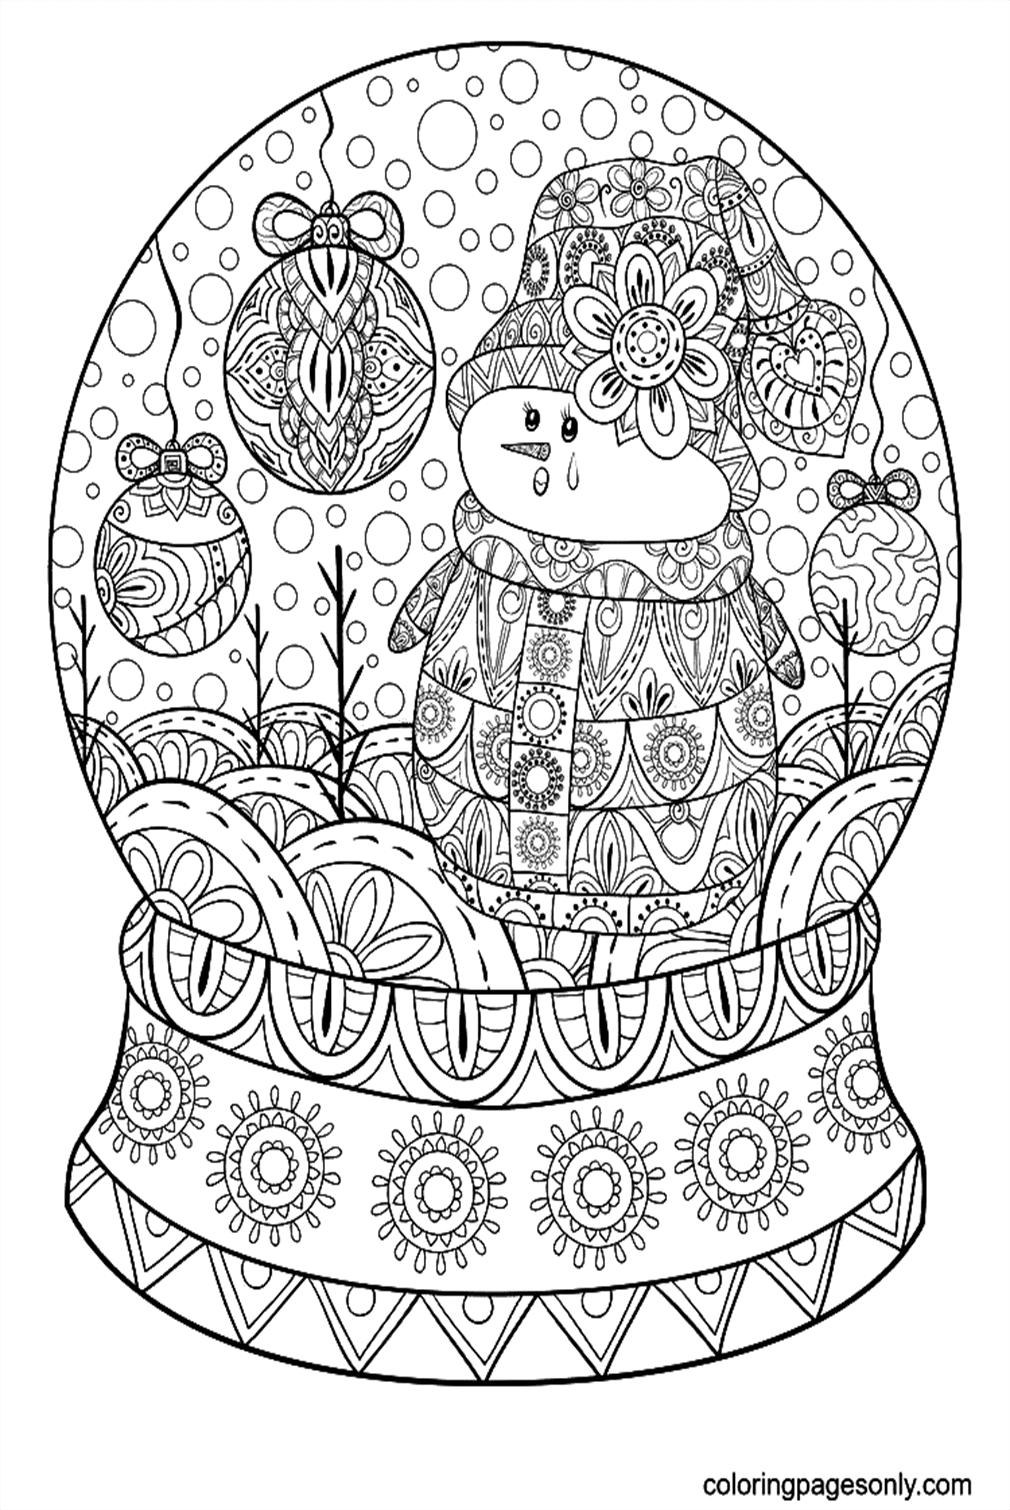 Cute Christmas Globe with Snowman Coloring Page